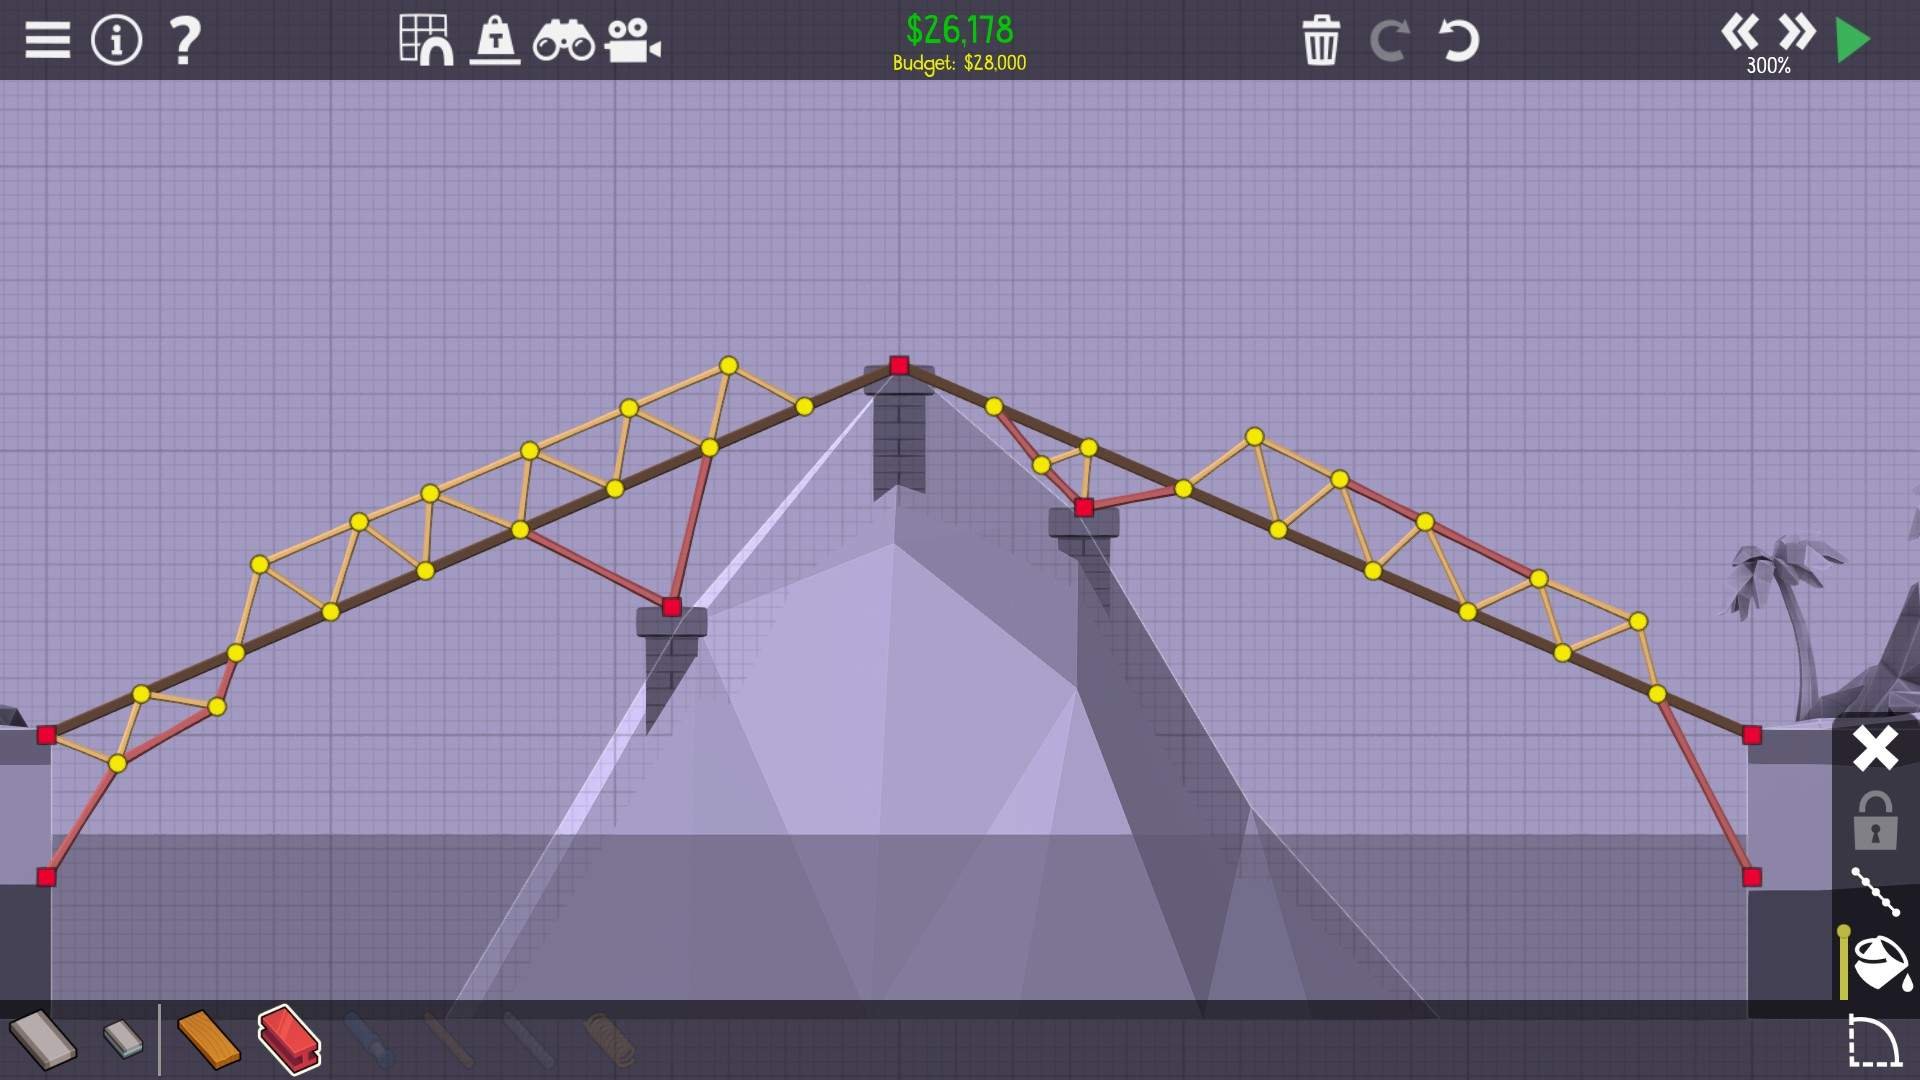 Poly Bridge 2 All Challenges Solutions For Pine Mountains World 2